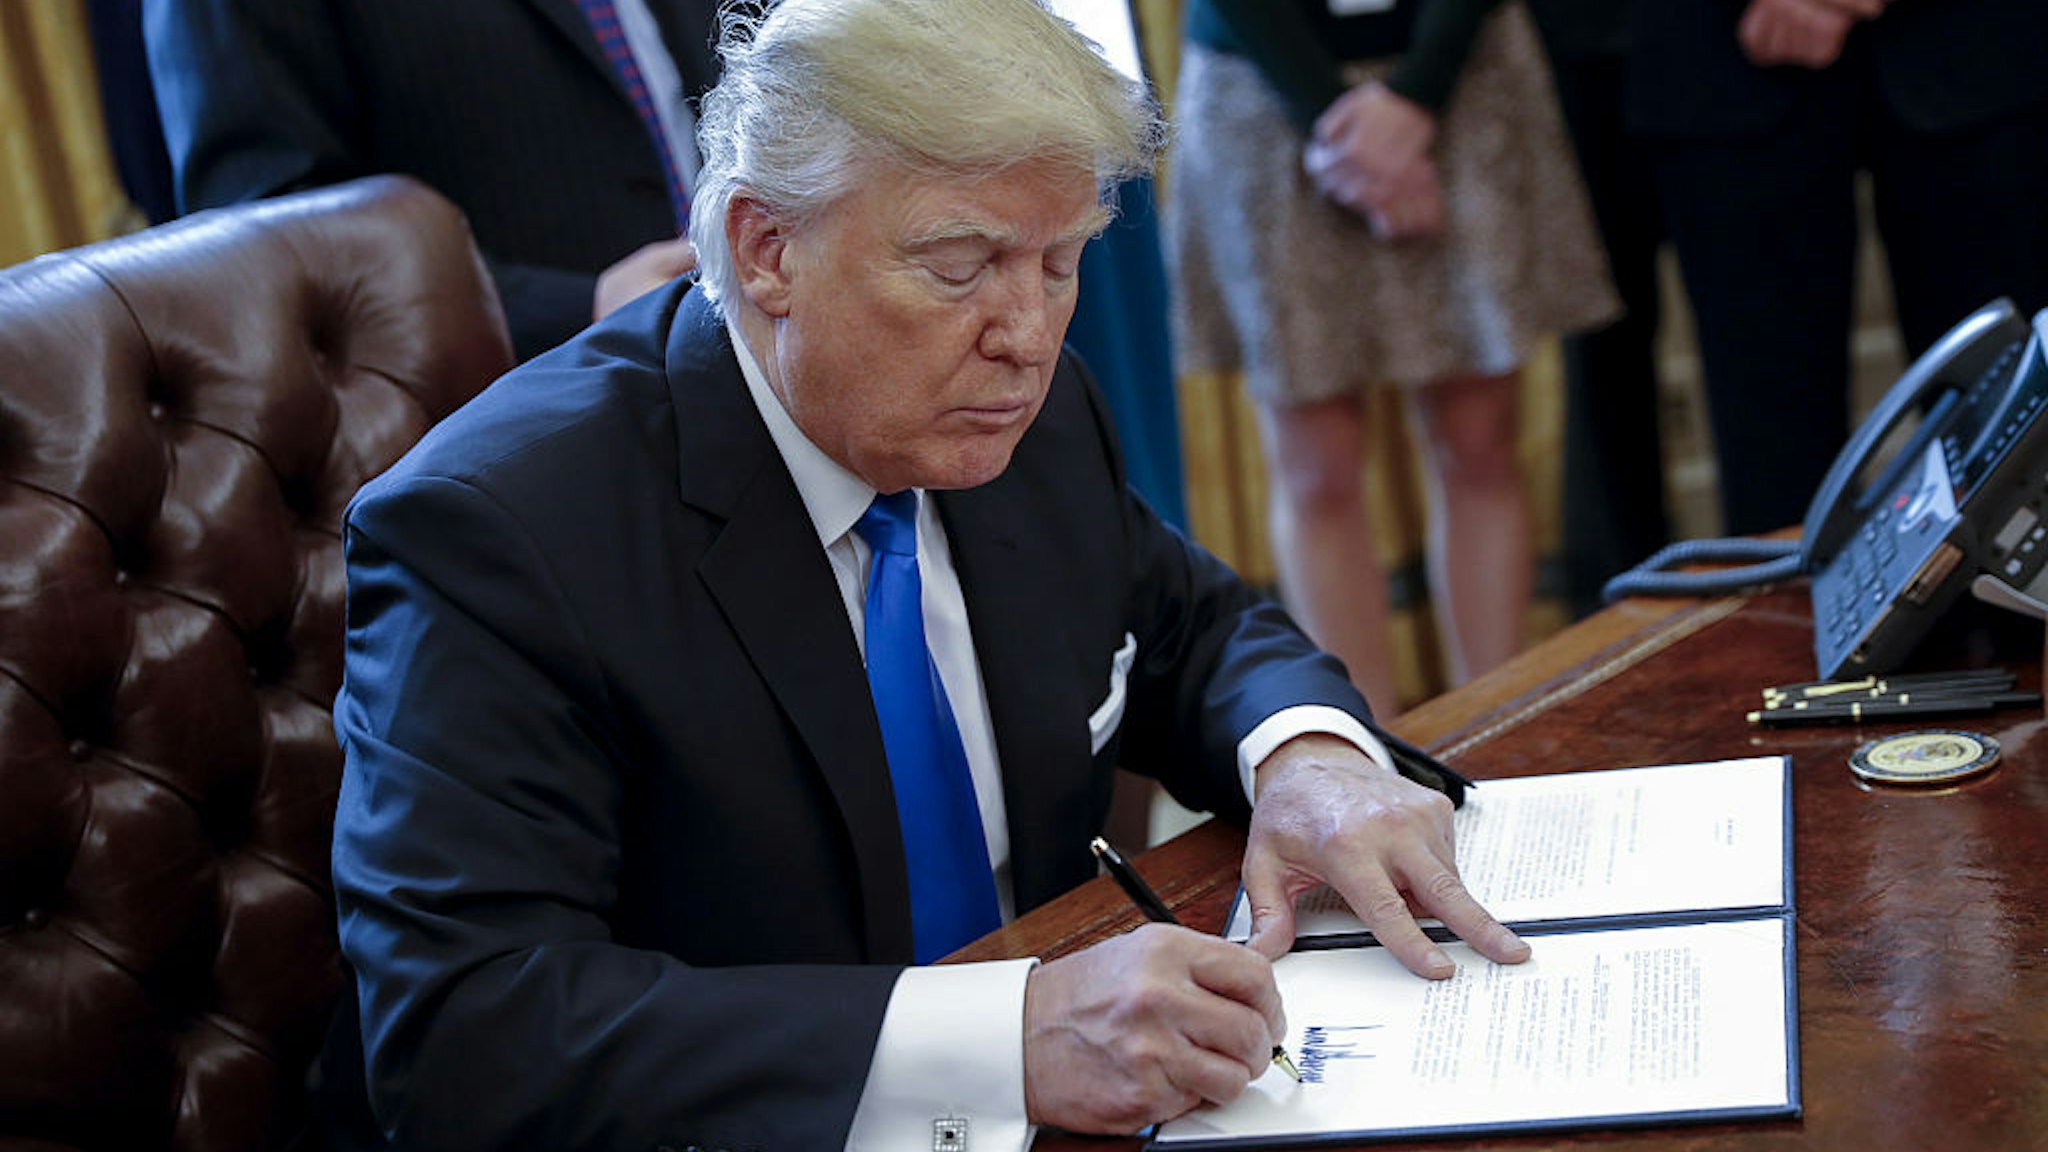 US President Donald Trump signs one of five executive orders related to the oil pipeline industry in the Oval Office of the White House in Washington, D.C., U.S., Tuesday, Jan. 24, 2017.